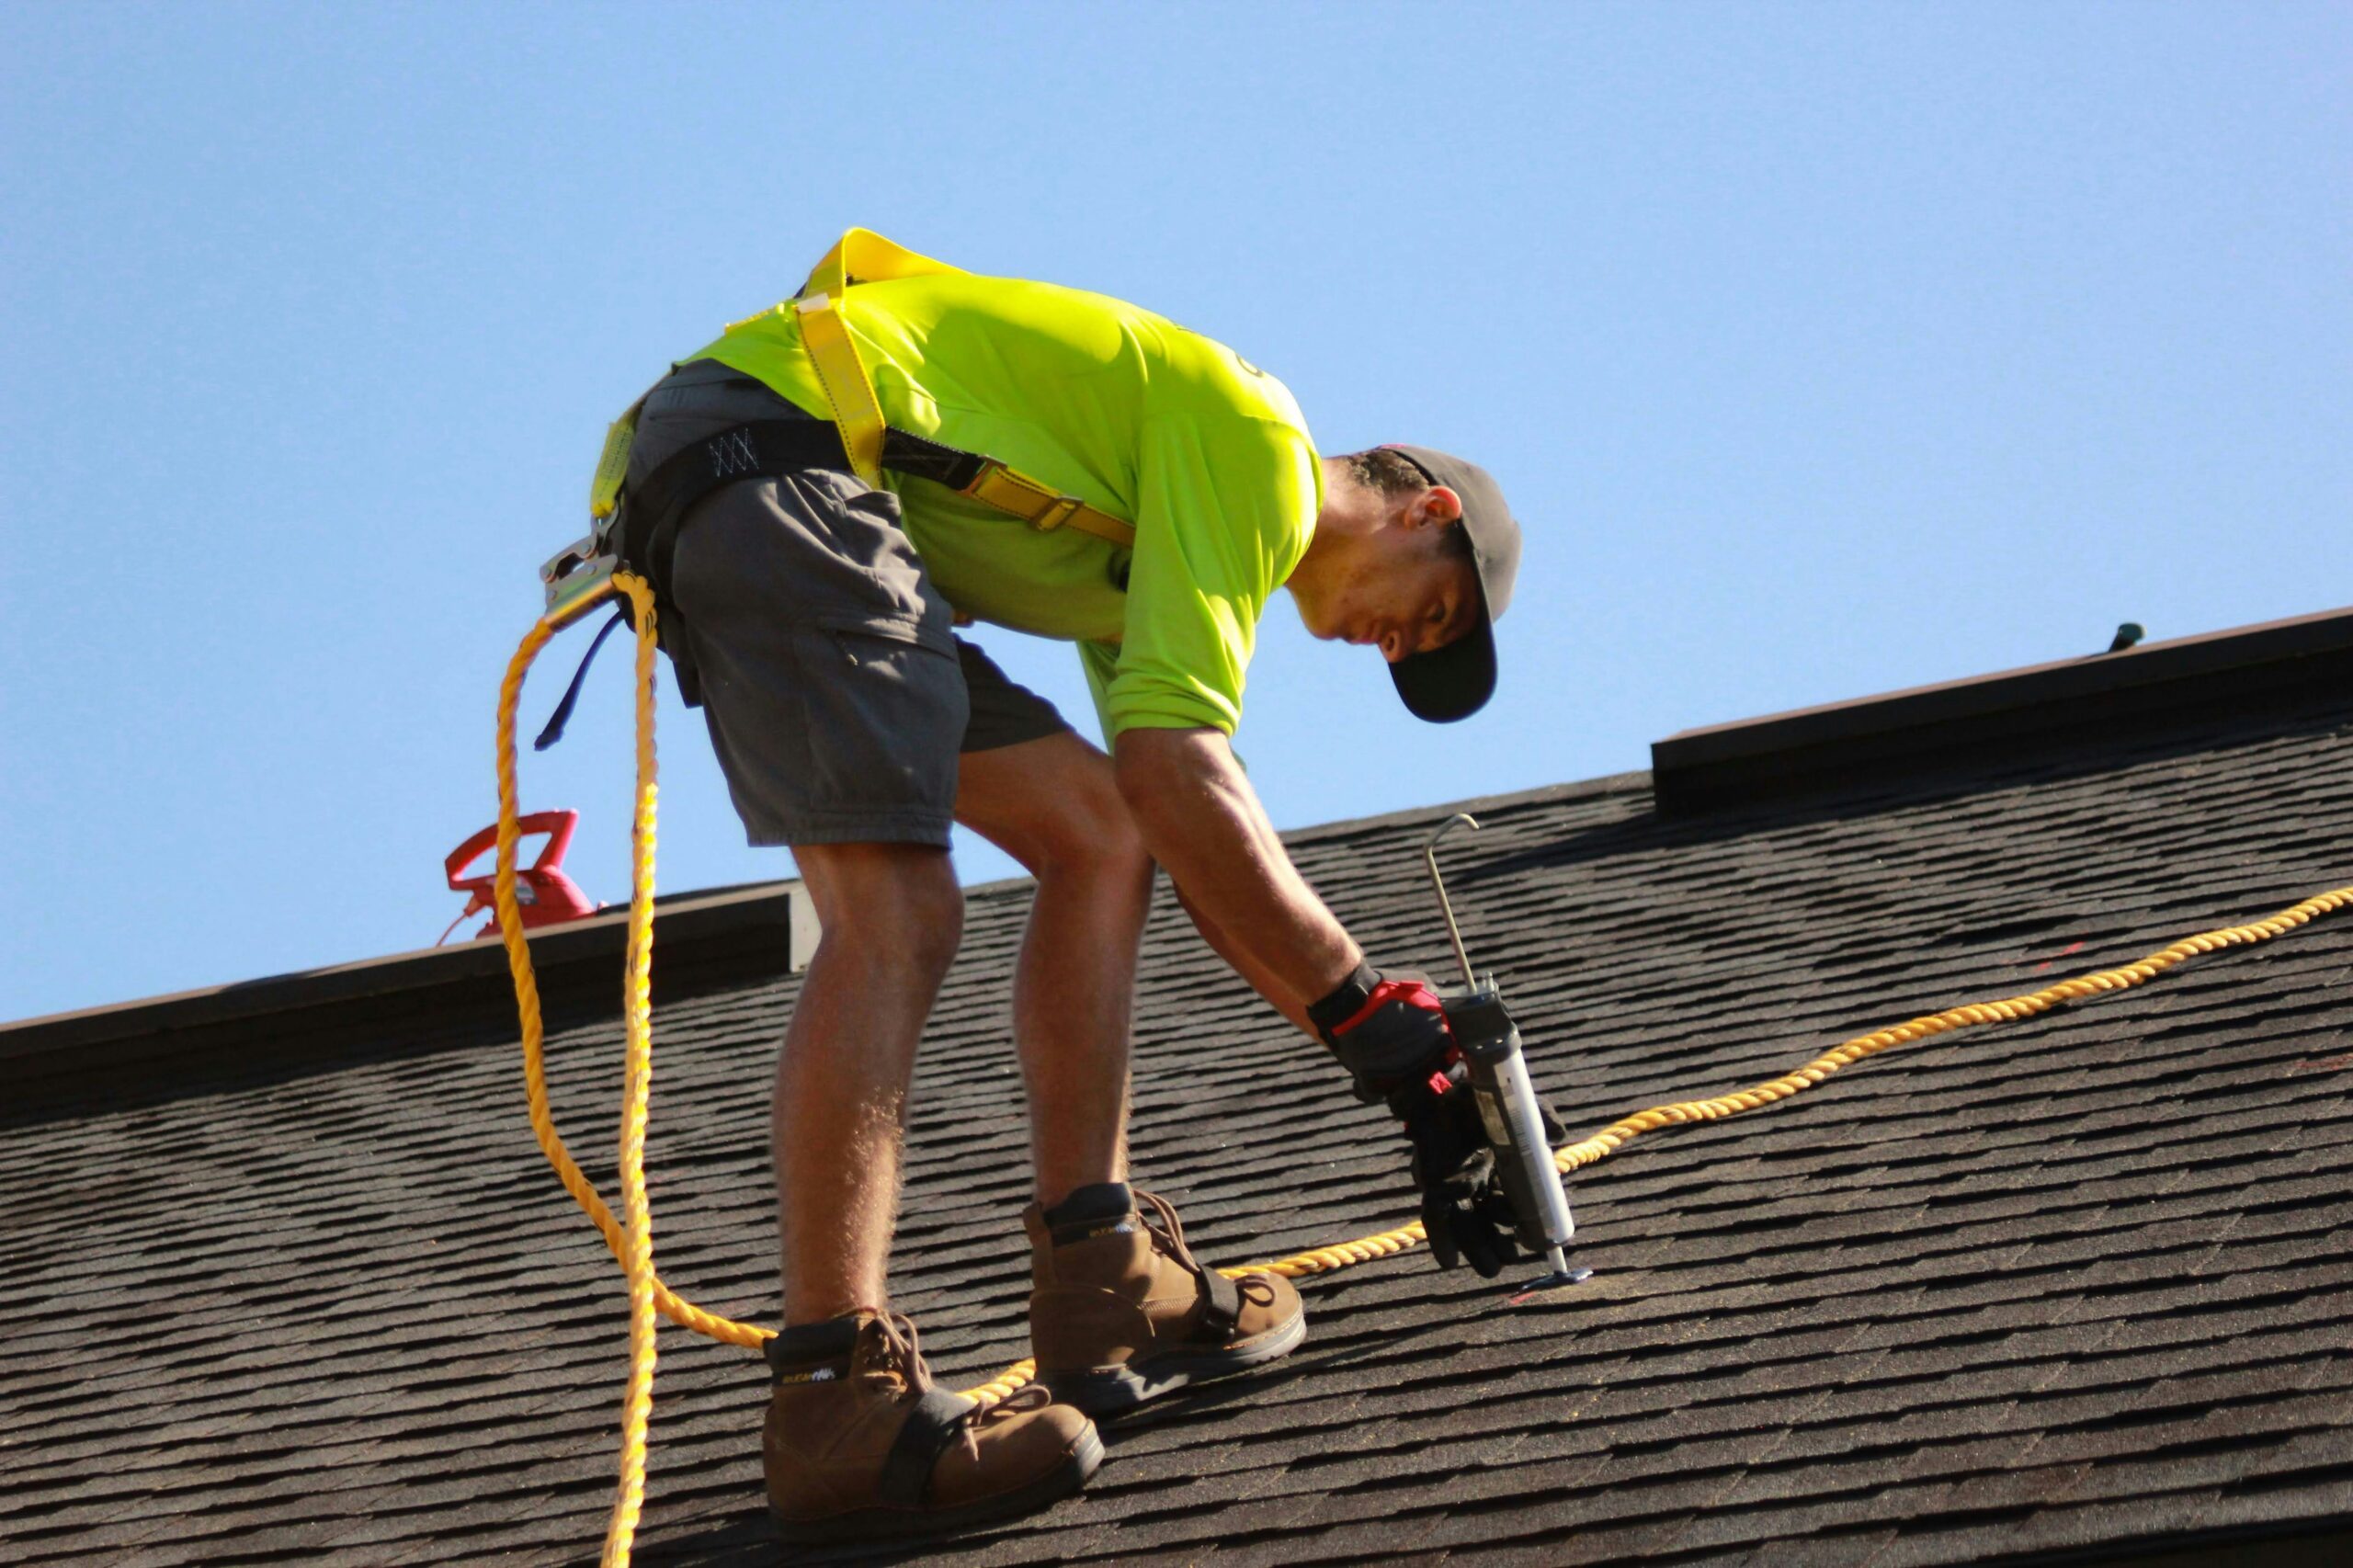 roofer from a local roofing company serving Newman Lake, WA secured with a safety, is installing shingles on a steep residential roof on a sunny day.